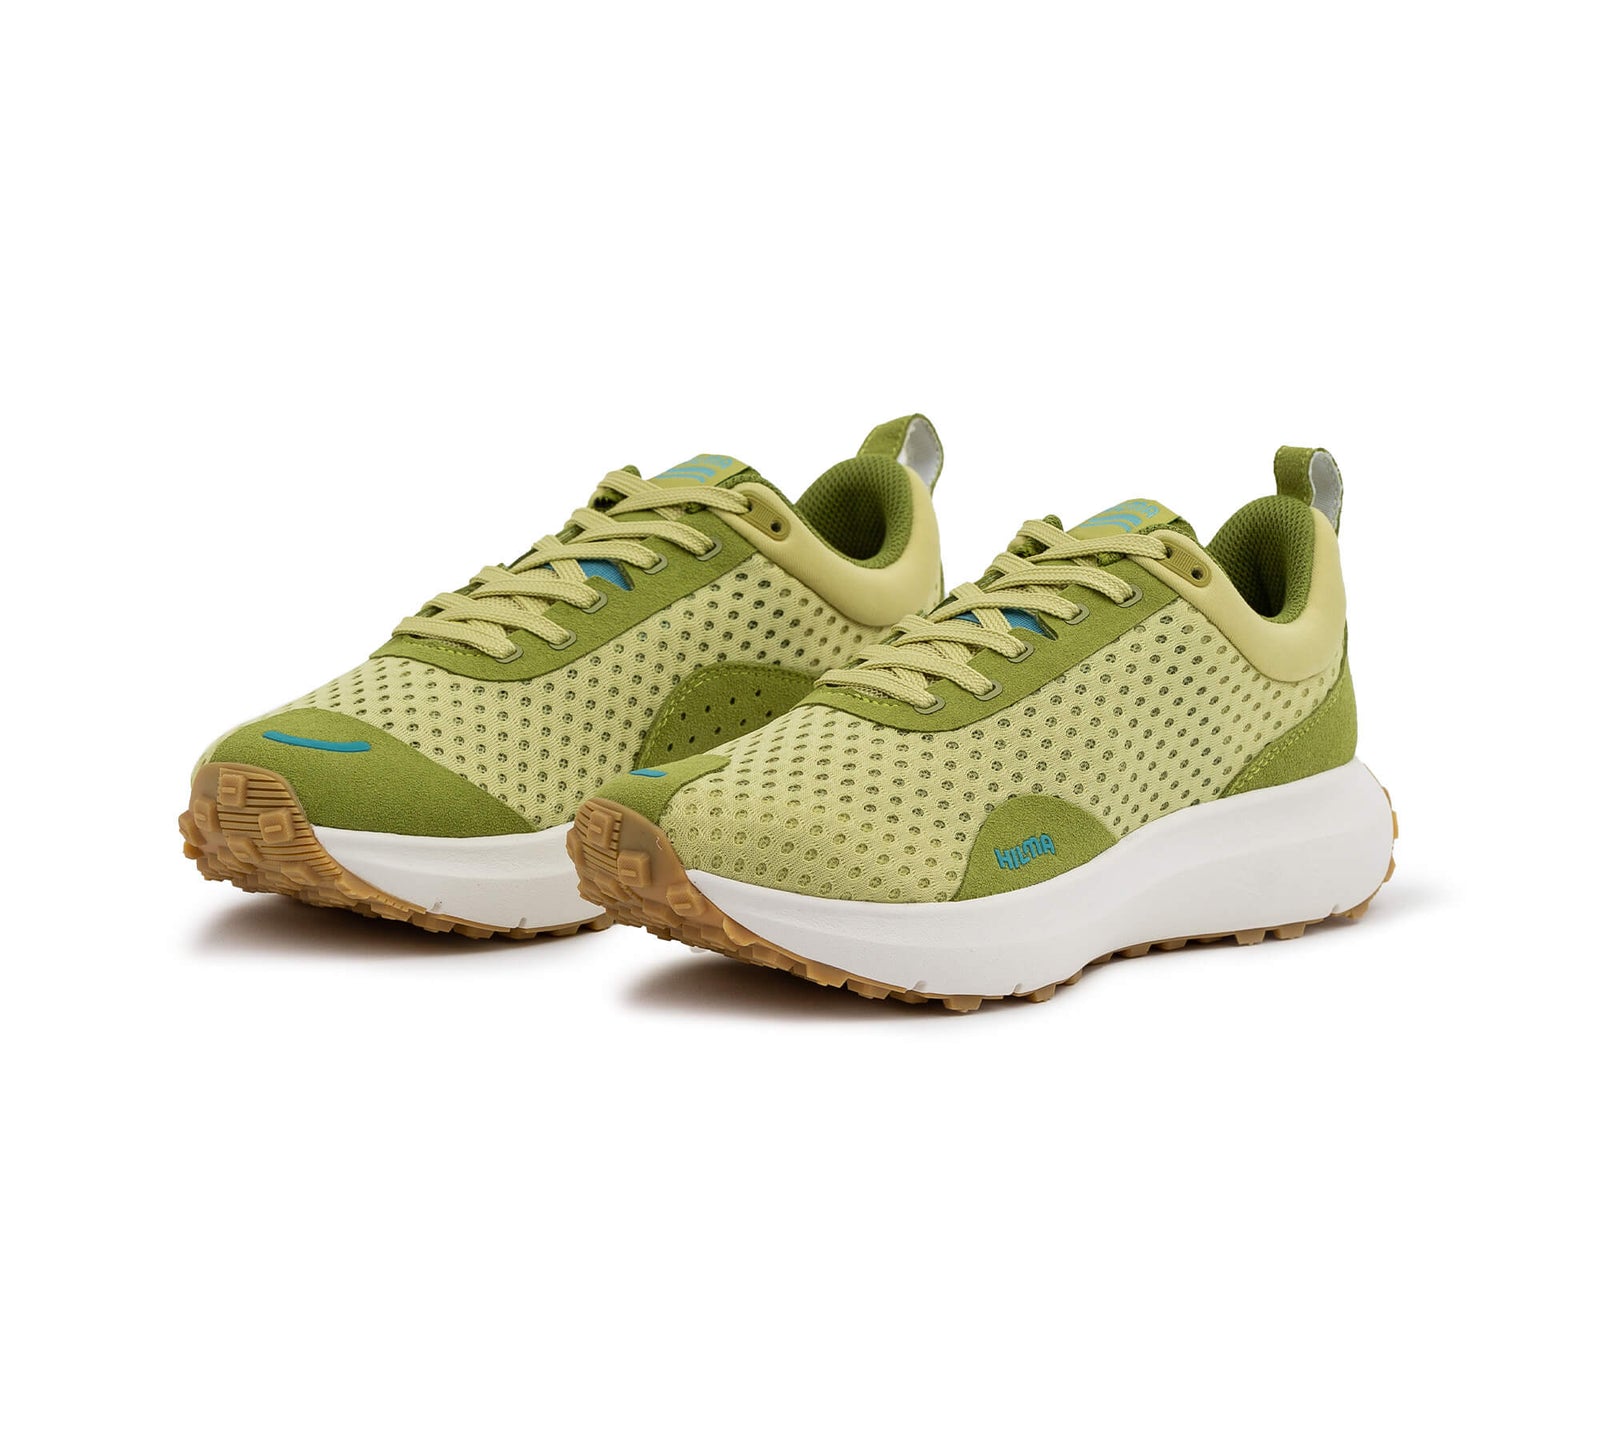 Hilma Running Shoes - Linden Green Shoes